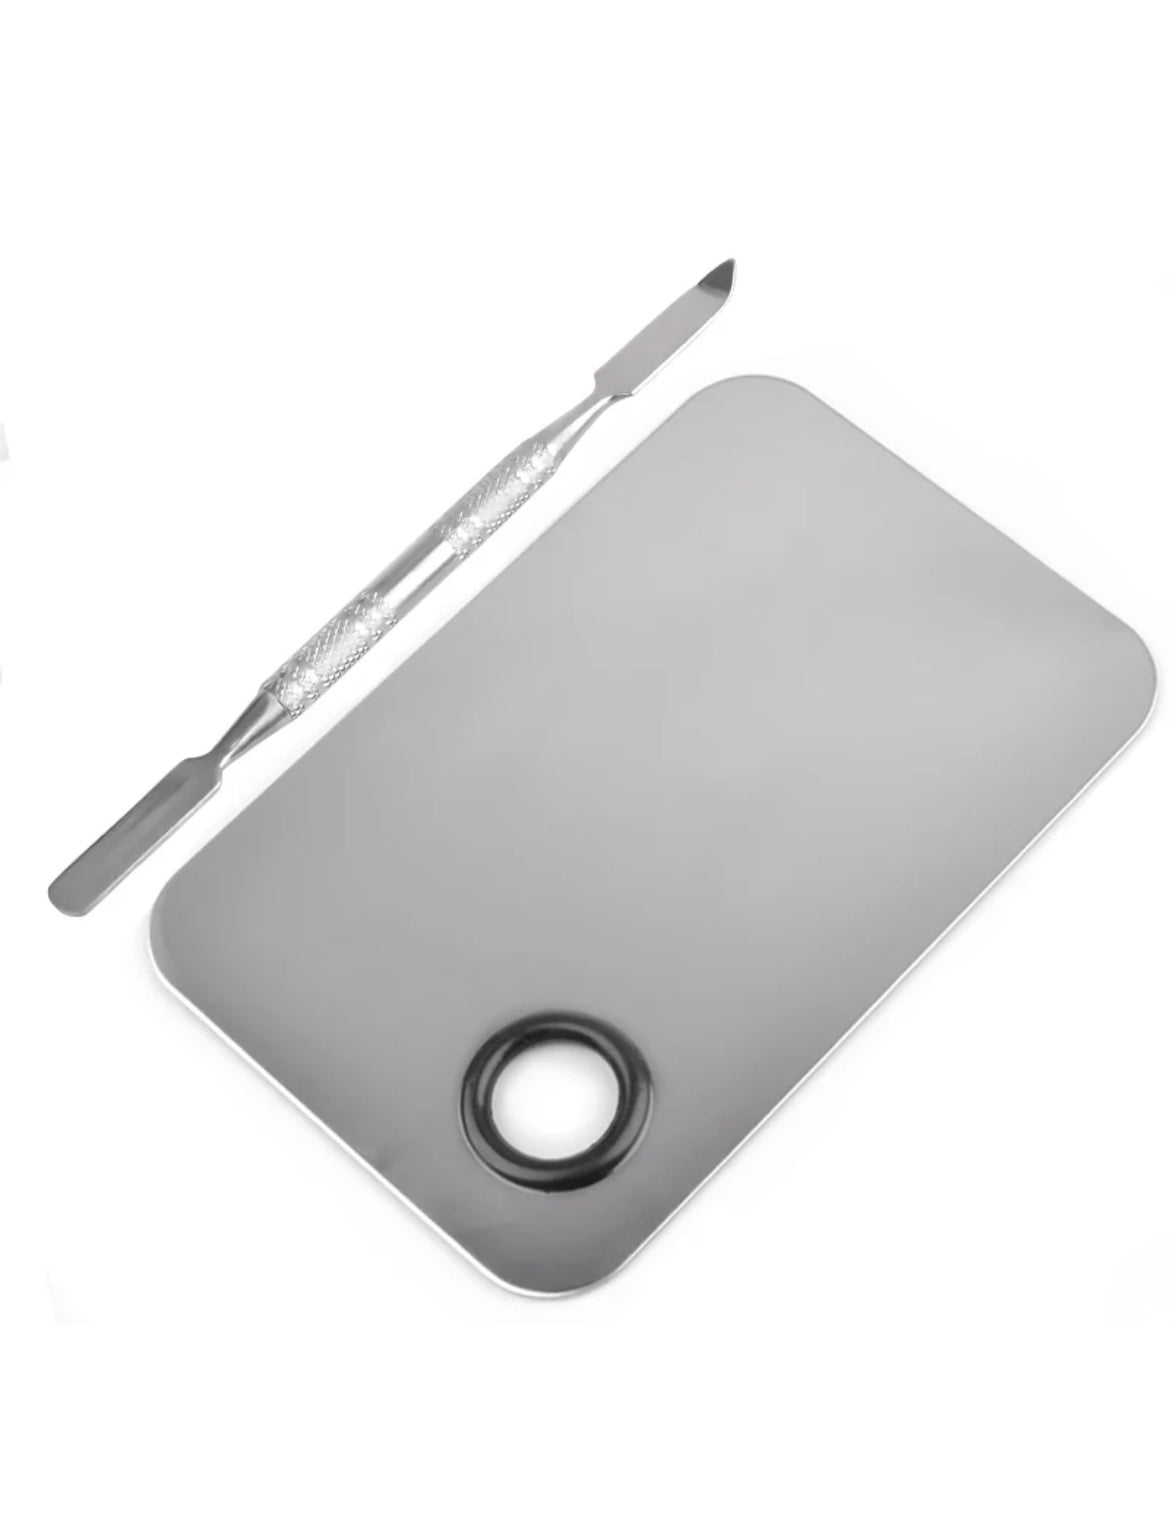 Thinsont Makeup Mixing Palette Stainless Steel Fine Workmanship